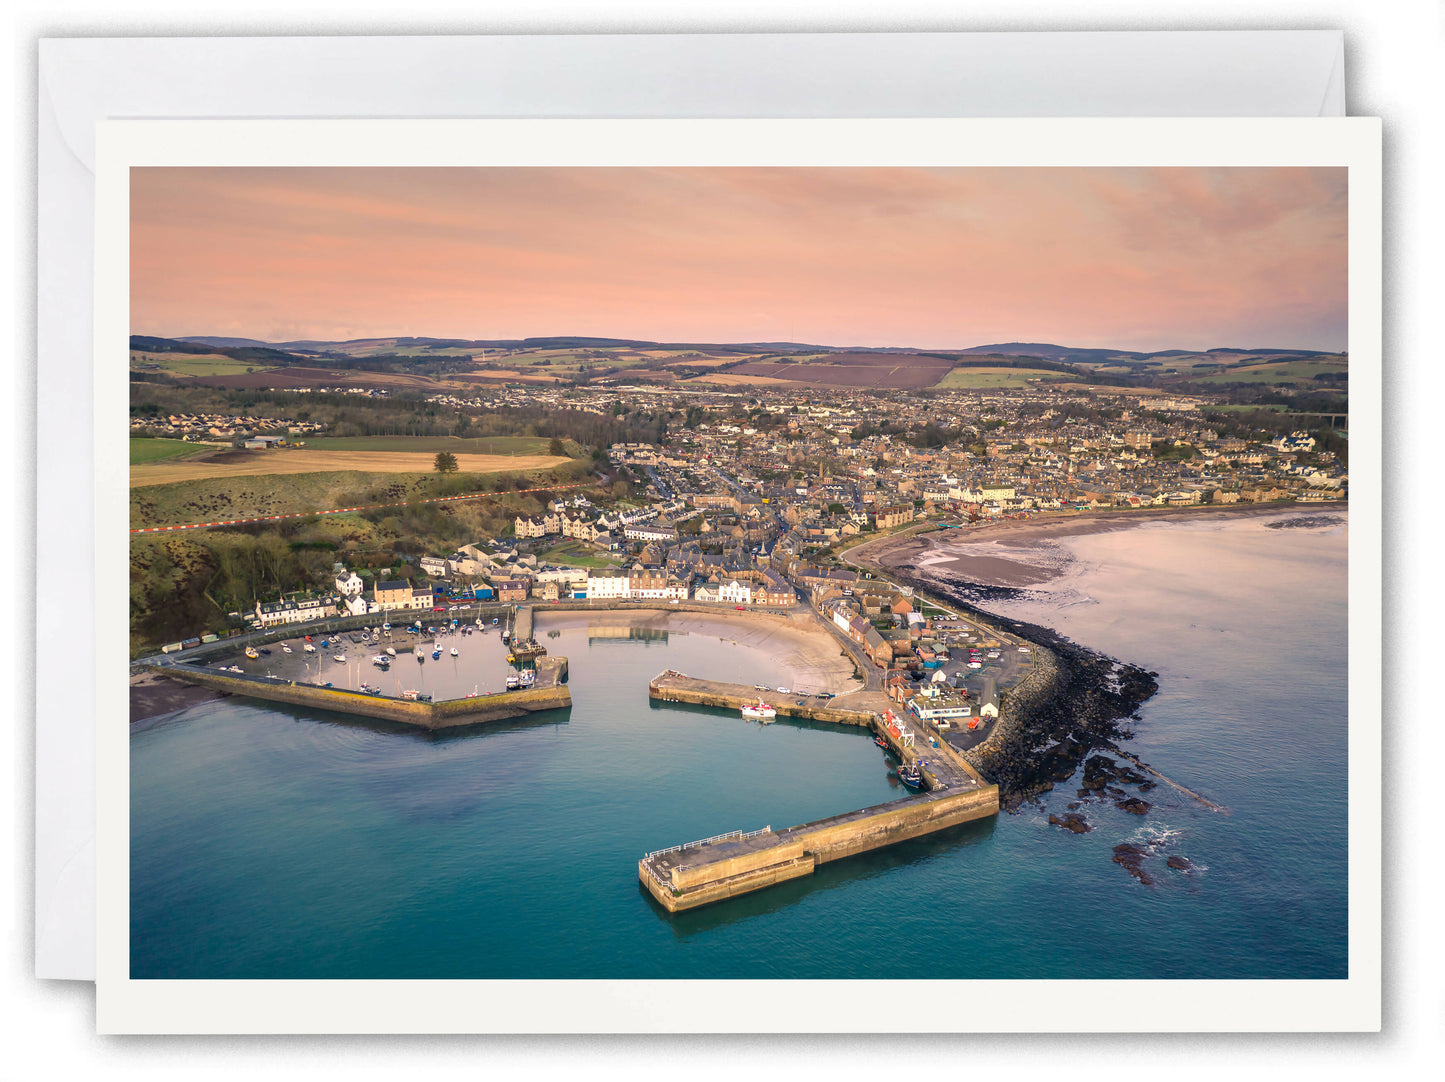 Stonehaven Harbour, Aberdeenshire - Scotland Greeting Card - Blank Inside